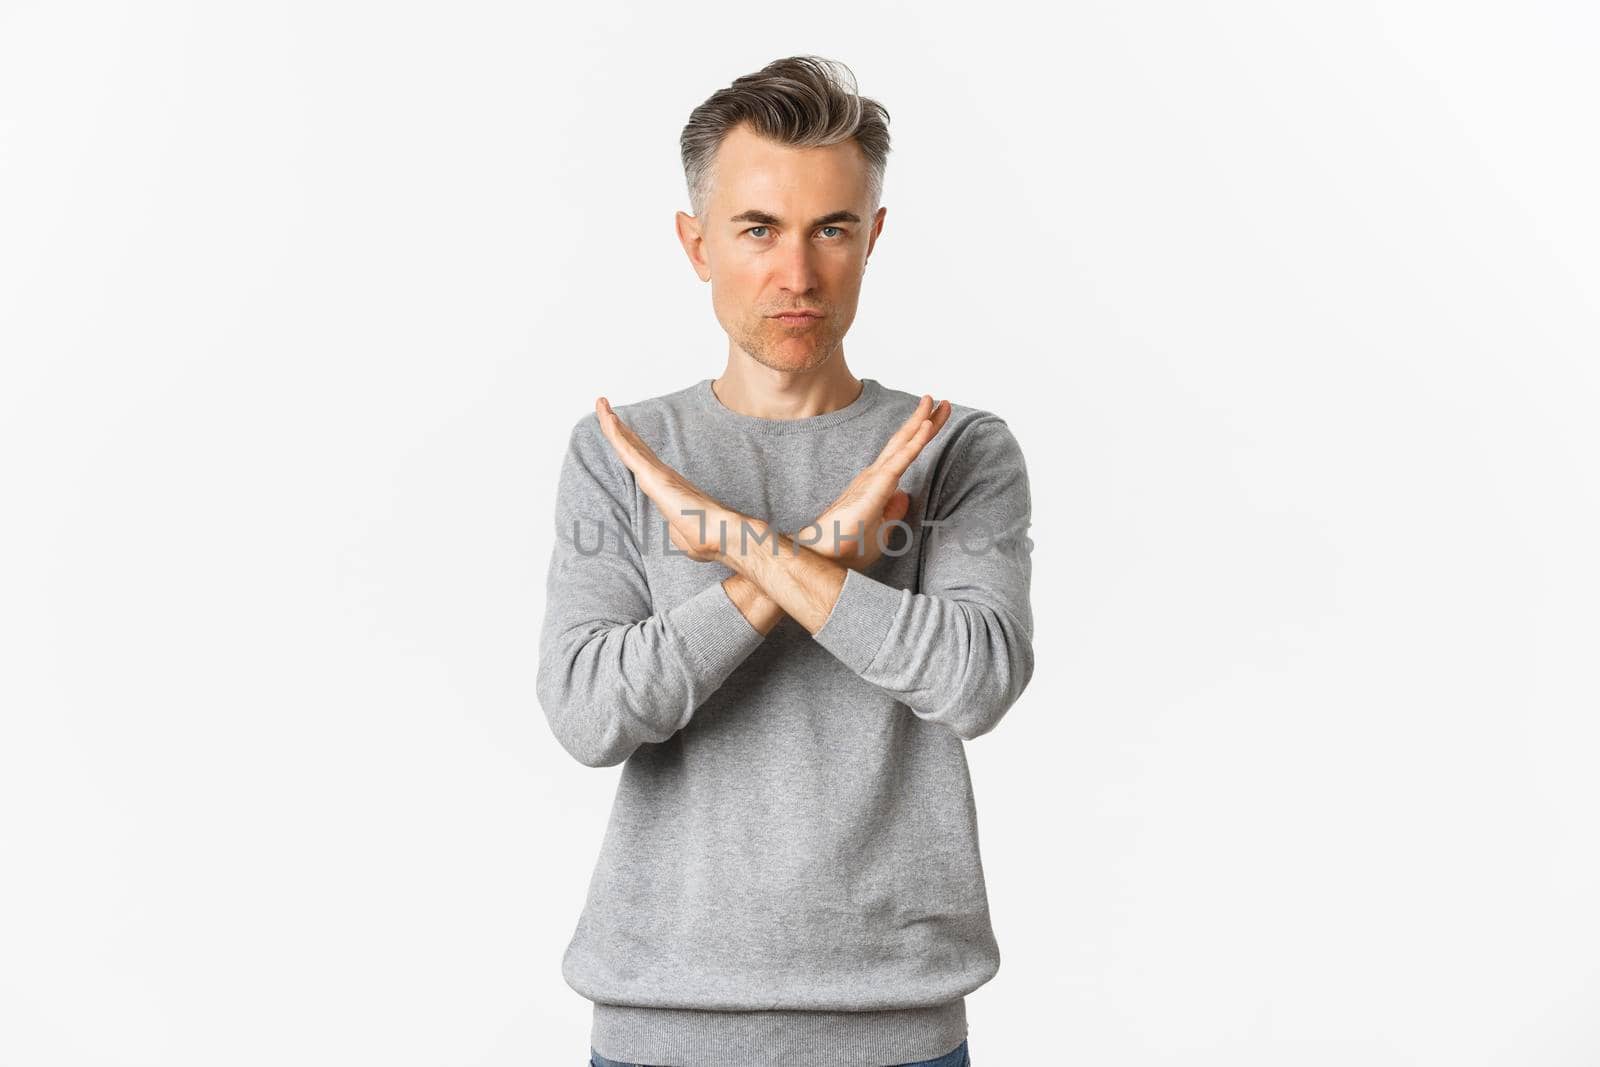 Image of angry middle-aged man looking serious, making cross gesture to stop something bad, telling no, prohibit action, standing over white background.